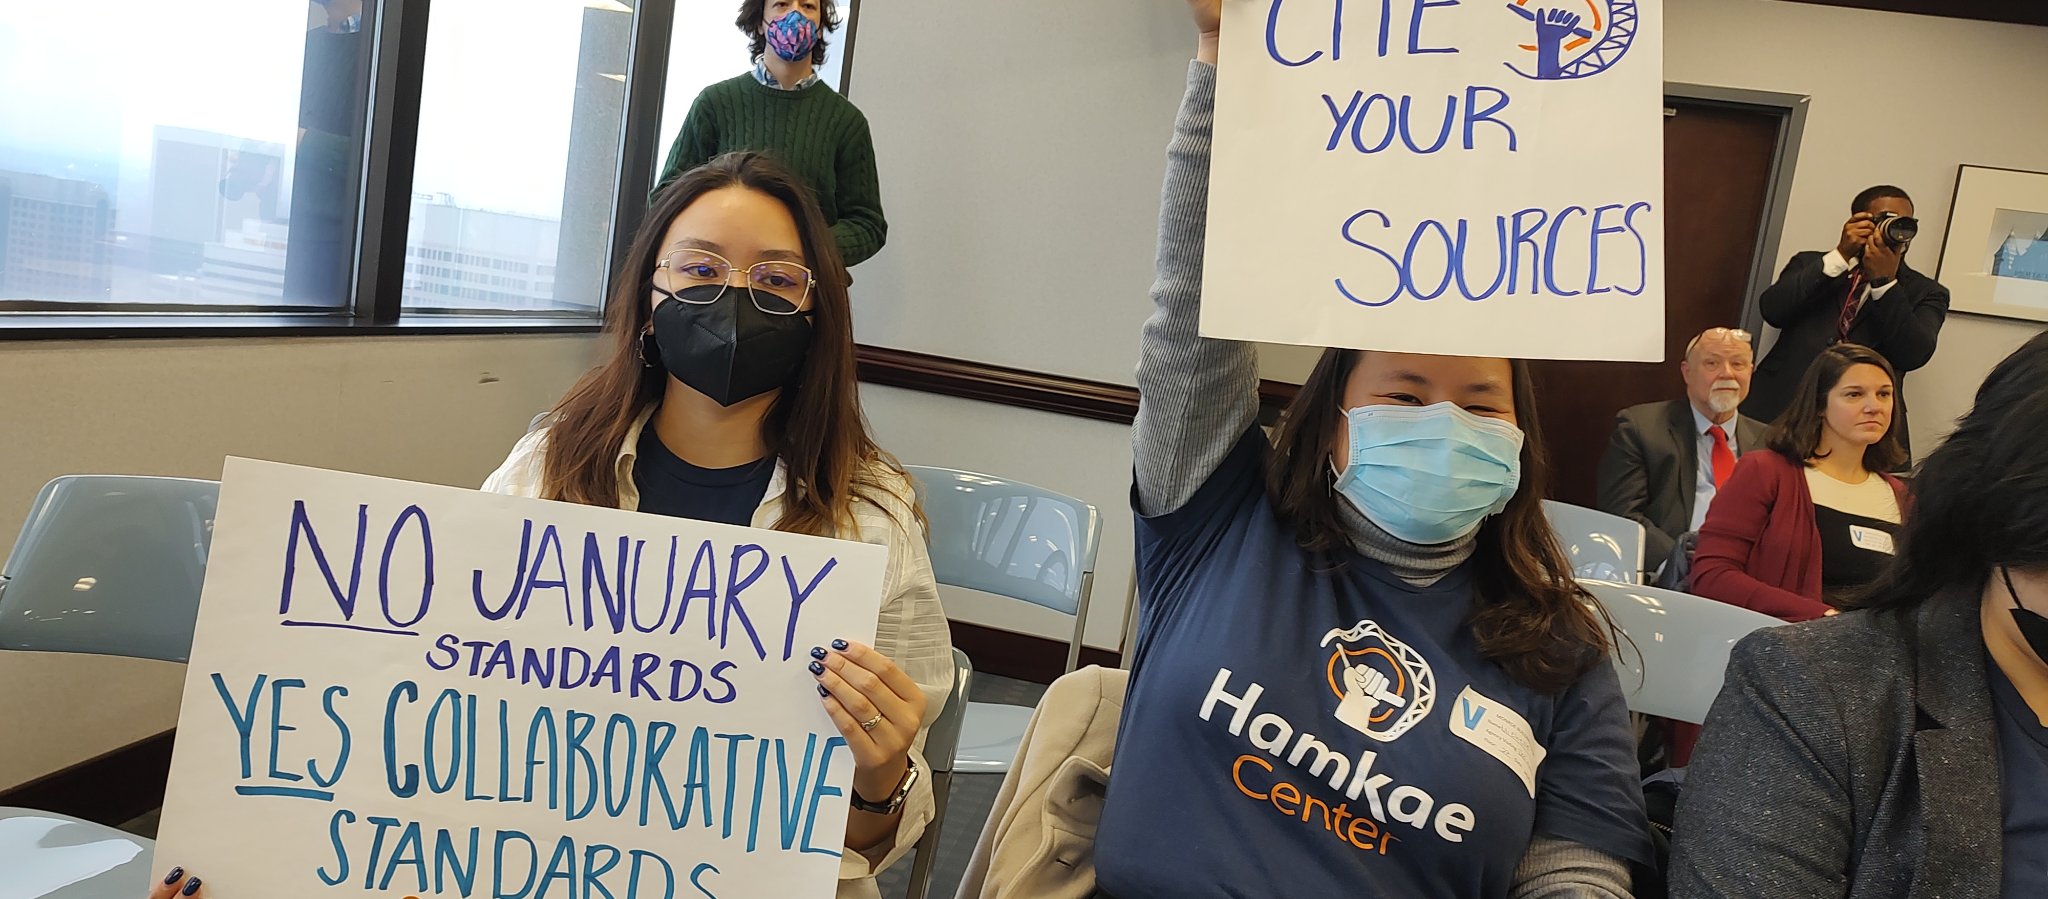 Asian American Virginians hold up handmade signs that say, "NO January Standards, YES Collaborative Standards" and "Cite Your Sources" at the Virginia Board of Education meeting in Richmond, VA on Feb. 2, 2023.